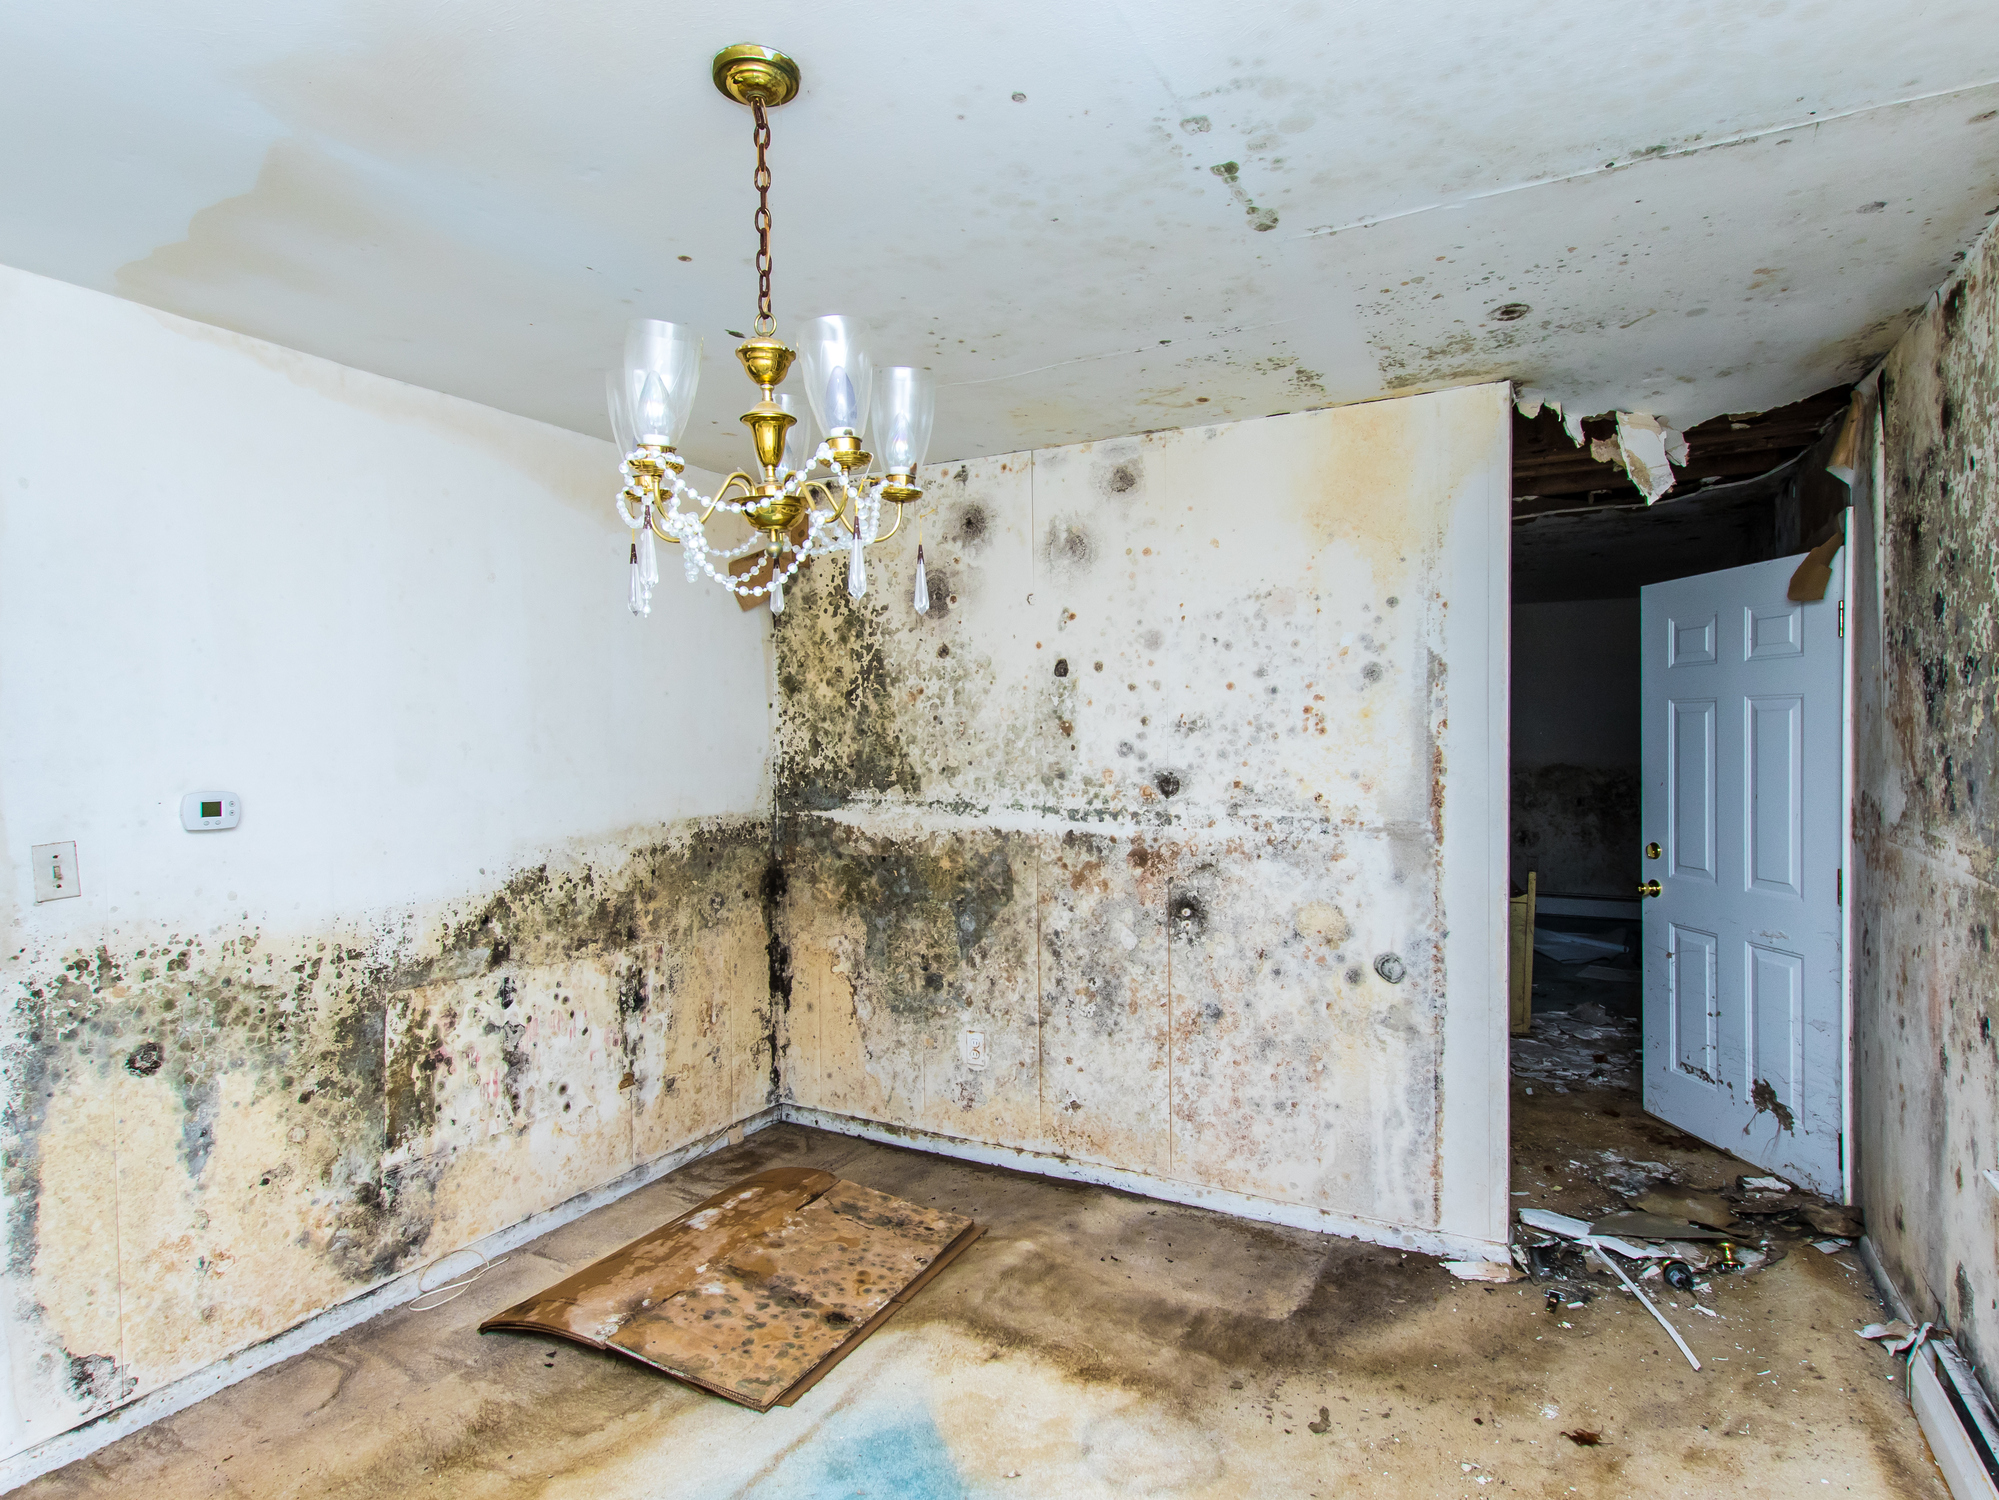 10 Signs of Mold: How to Detect Mold in Your Home?